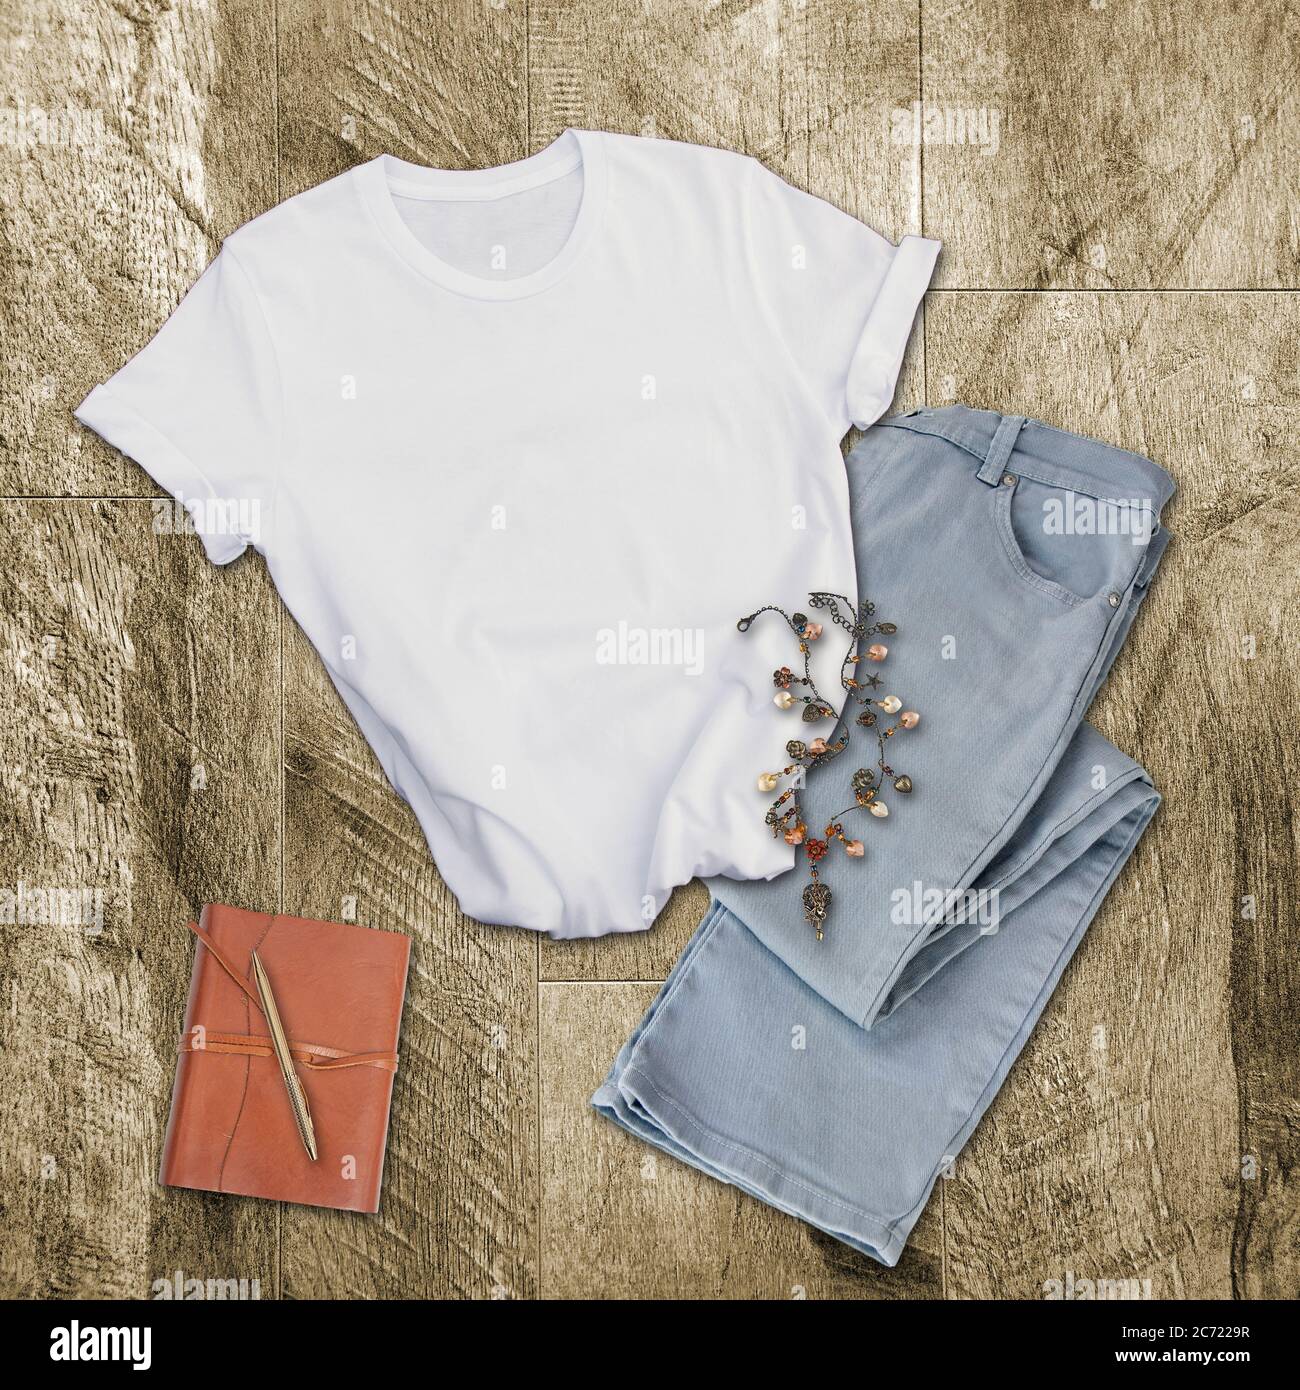 White tshirt mockup fashion clothing.   Gray pants, white shirt, leather diary and pen and a boho necklace on a wood background with room for text for Stock Photo